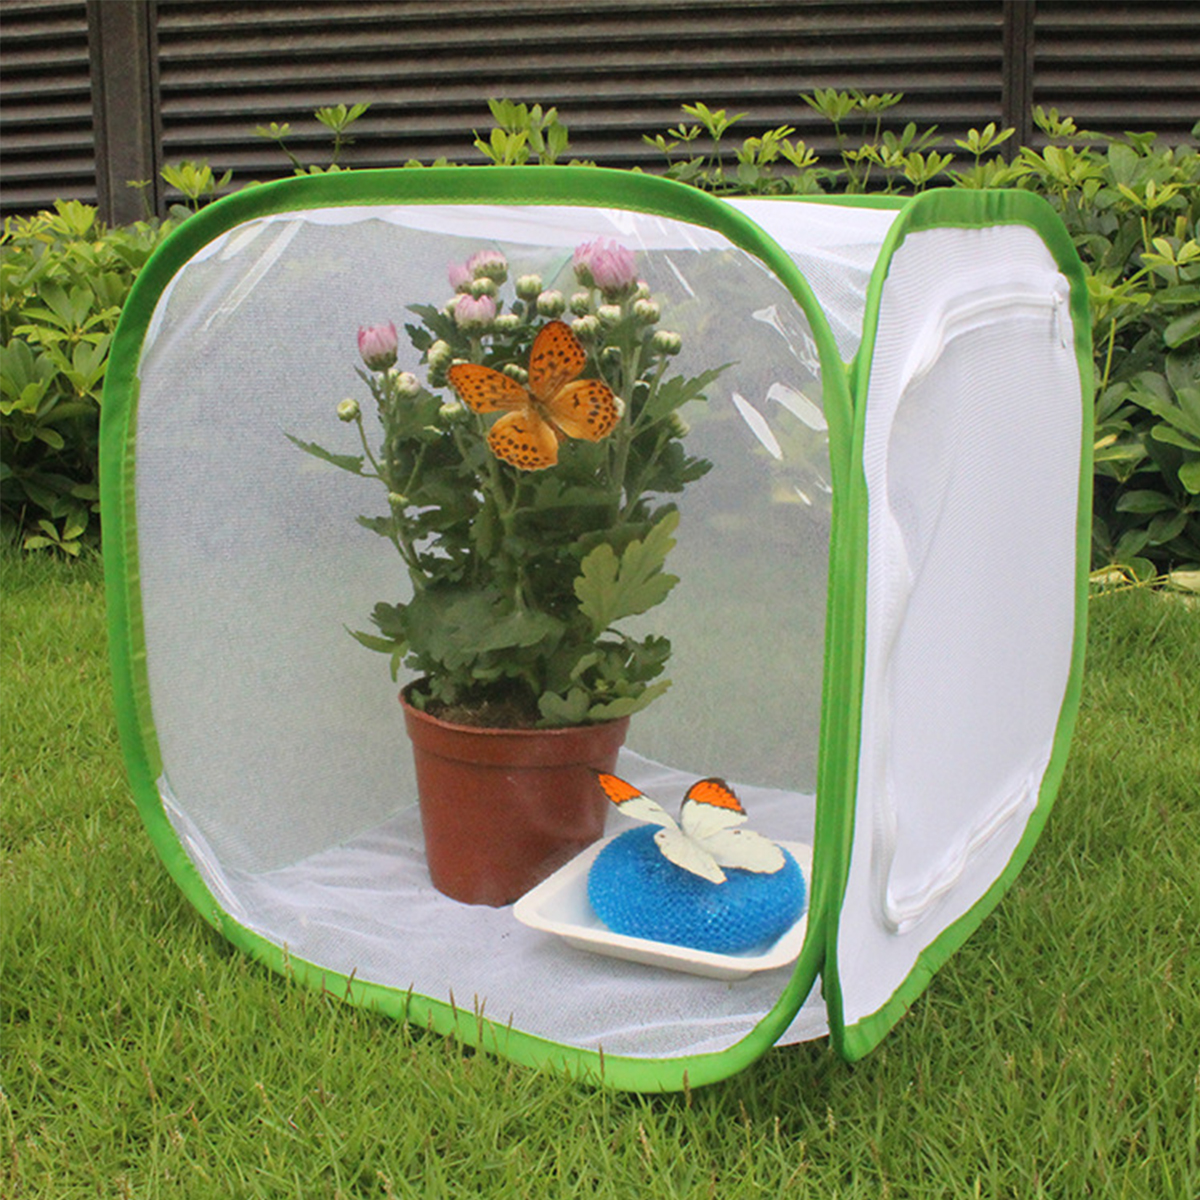 Green-Collapsible-Insect-Habitat-Cage-Butterfly-Mesh-Transparent-Surface-Portable-Zipper-Cage-Plant--1688452-4